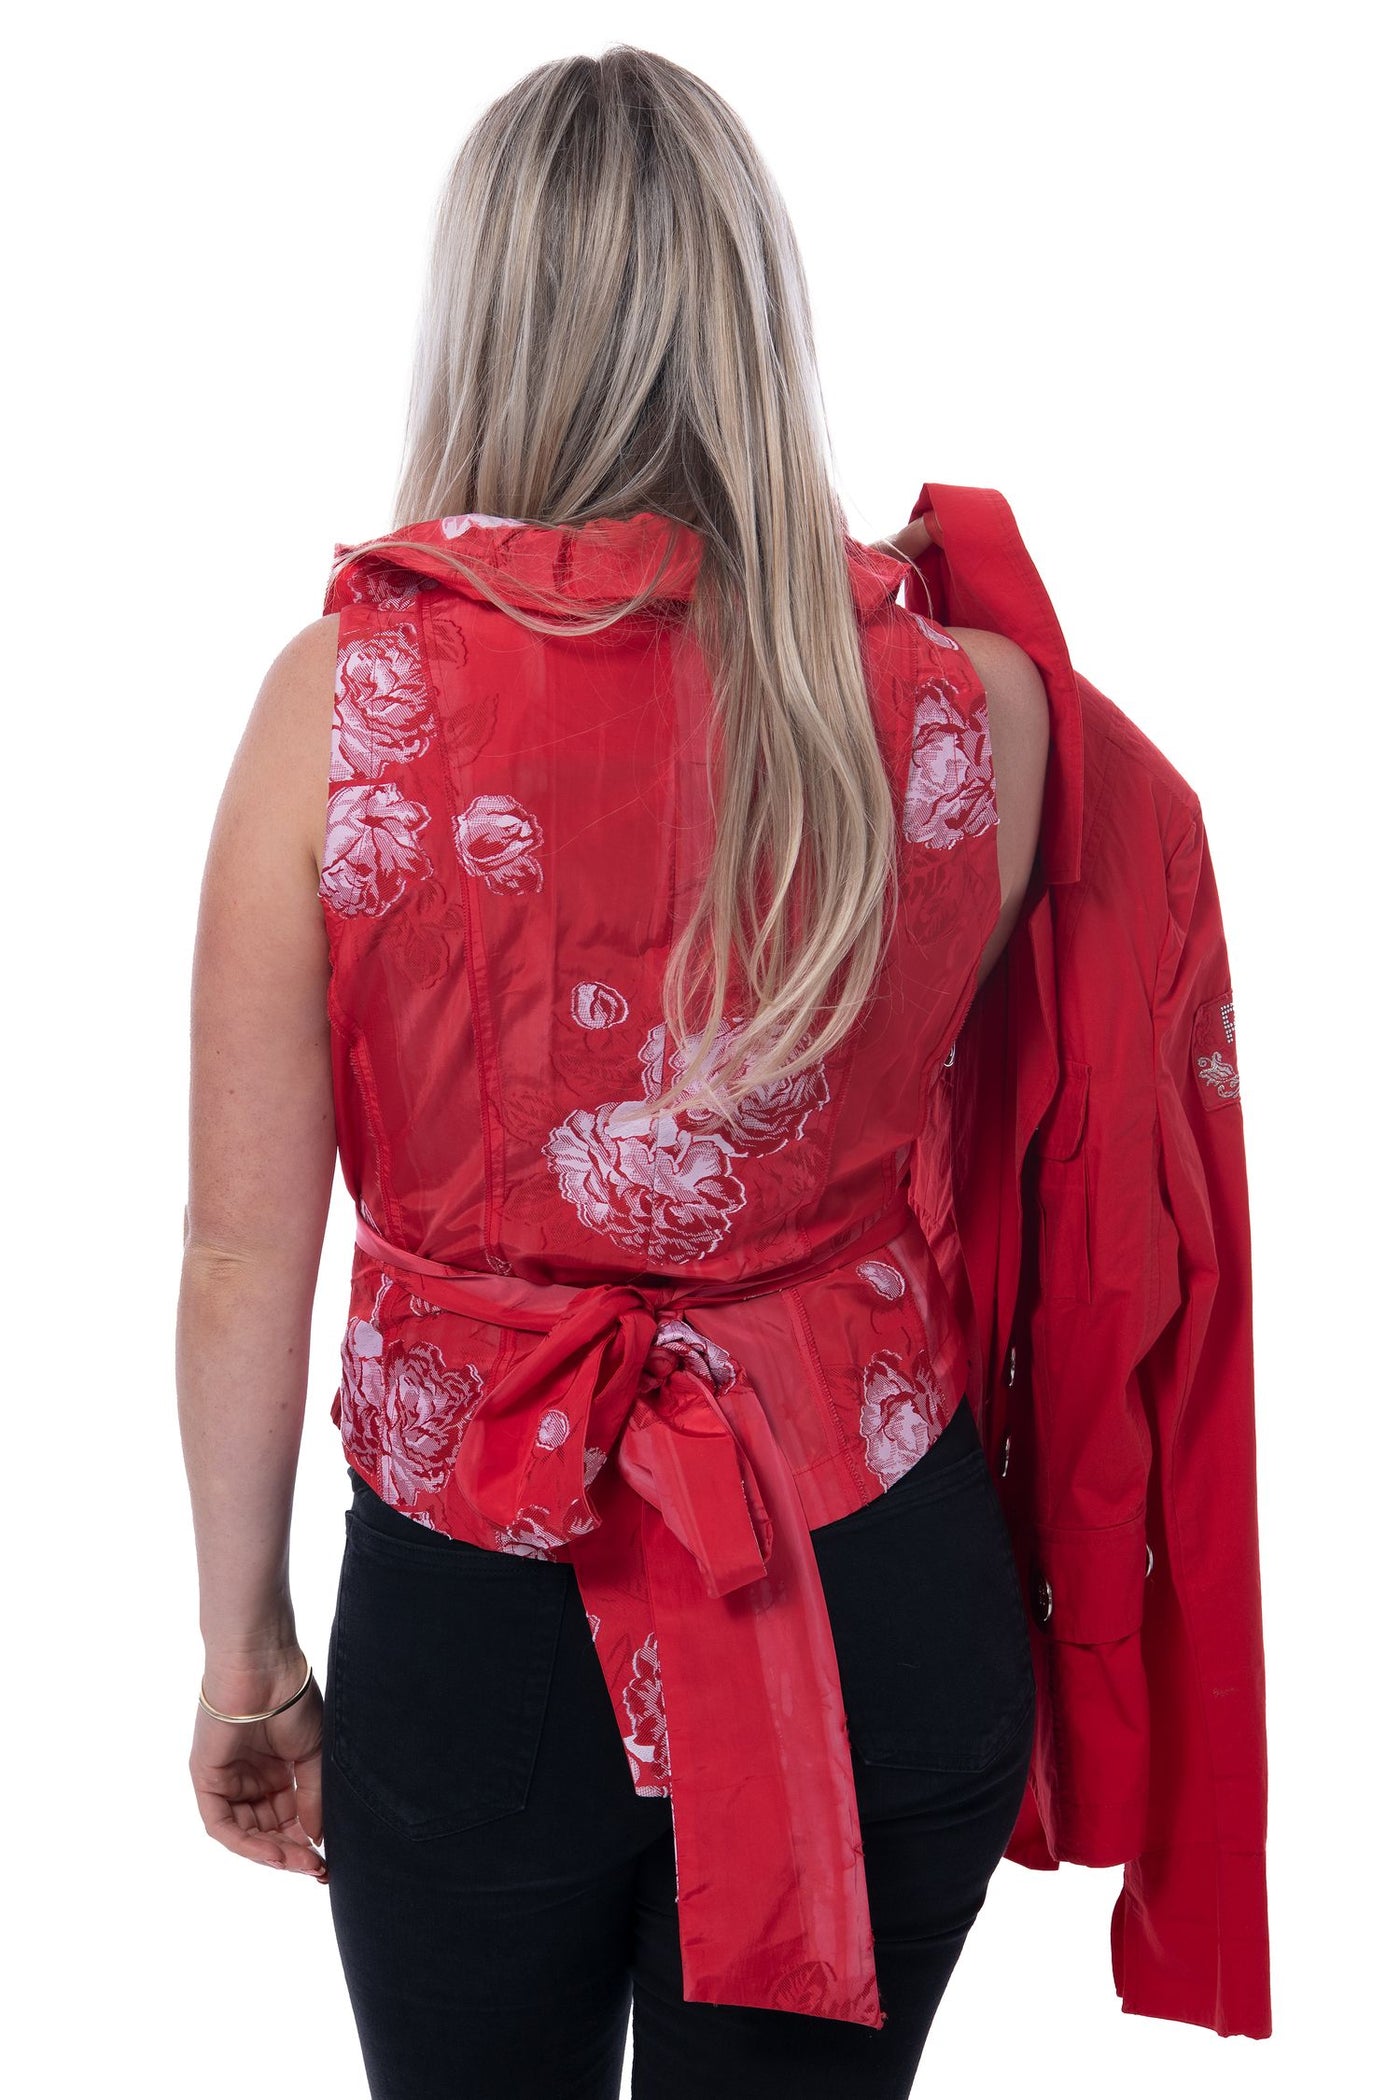 Airfield sleeveless red with white flower blouse with tie around waist